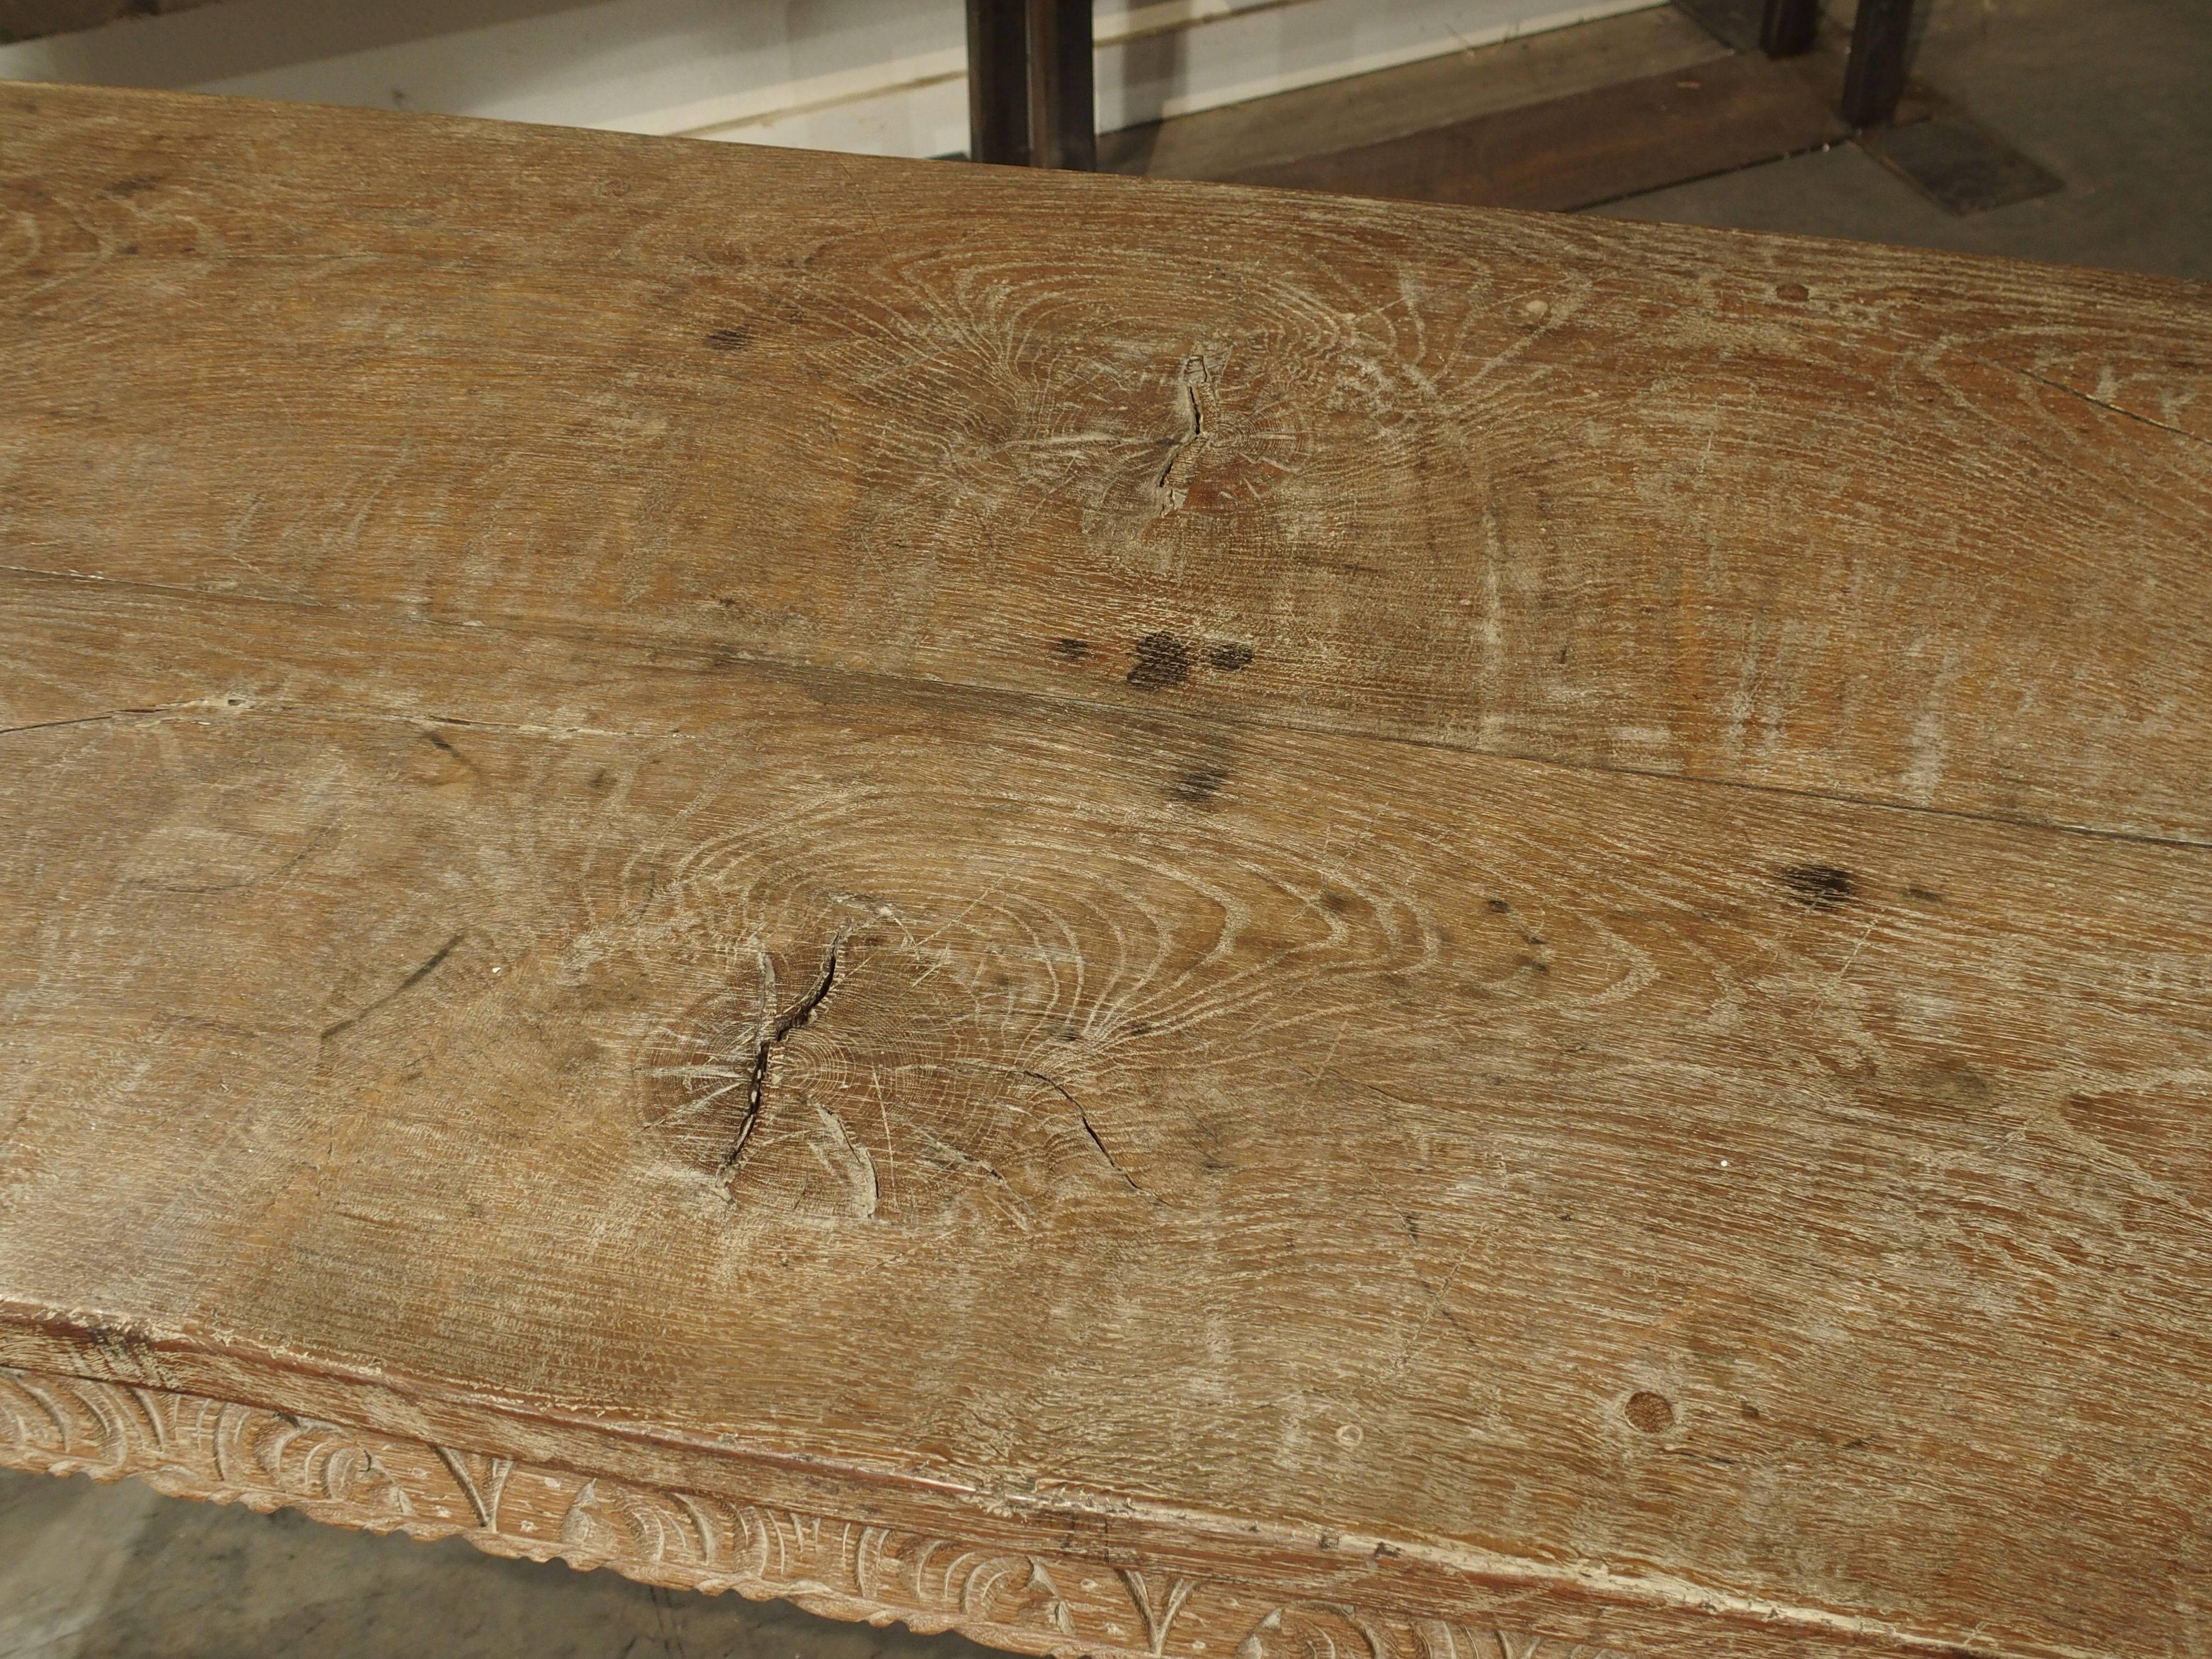 From England, this limed or whitewashed oak table dates to the early 1800s. The two- plank top has large graceful burls or knots at the centre of each plank as well as lovely graining throughout the rest of the wood. At the ends of the table are two